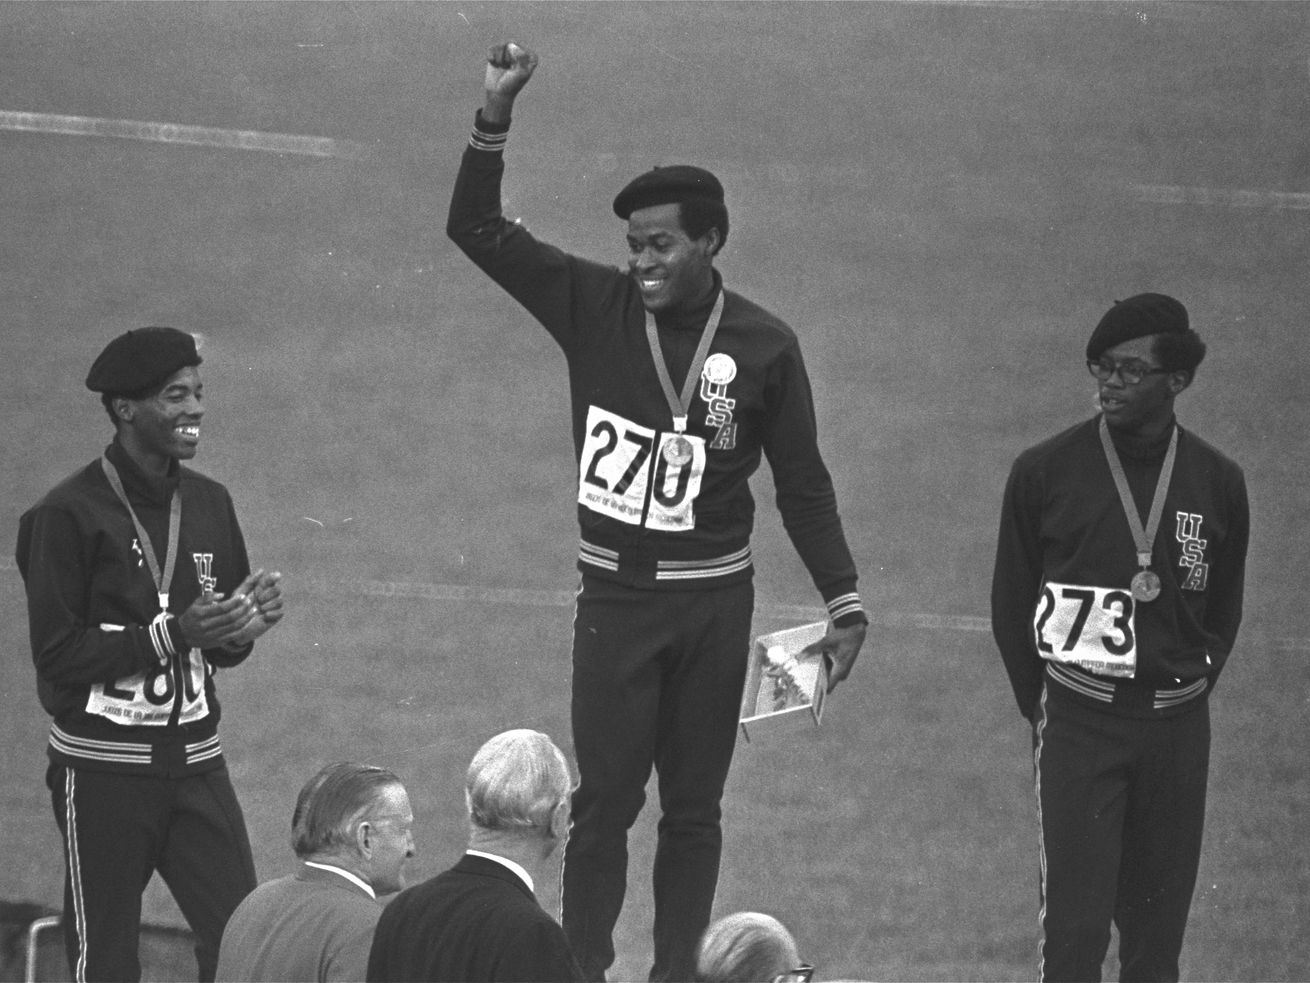 Lee Evans, center, the record-setting sprinter who wore a black beret in a sign of protest at the 1968 Olympics, died Wednesday. He was 74. 